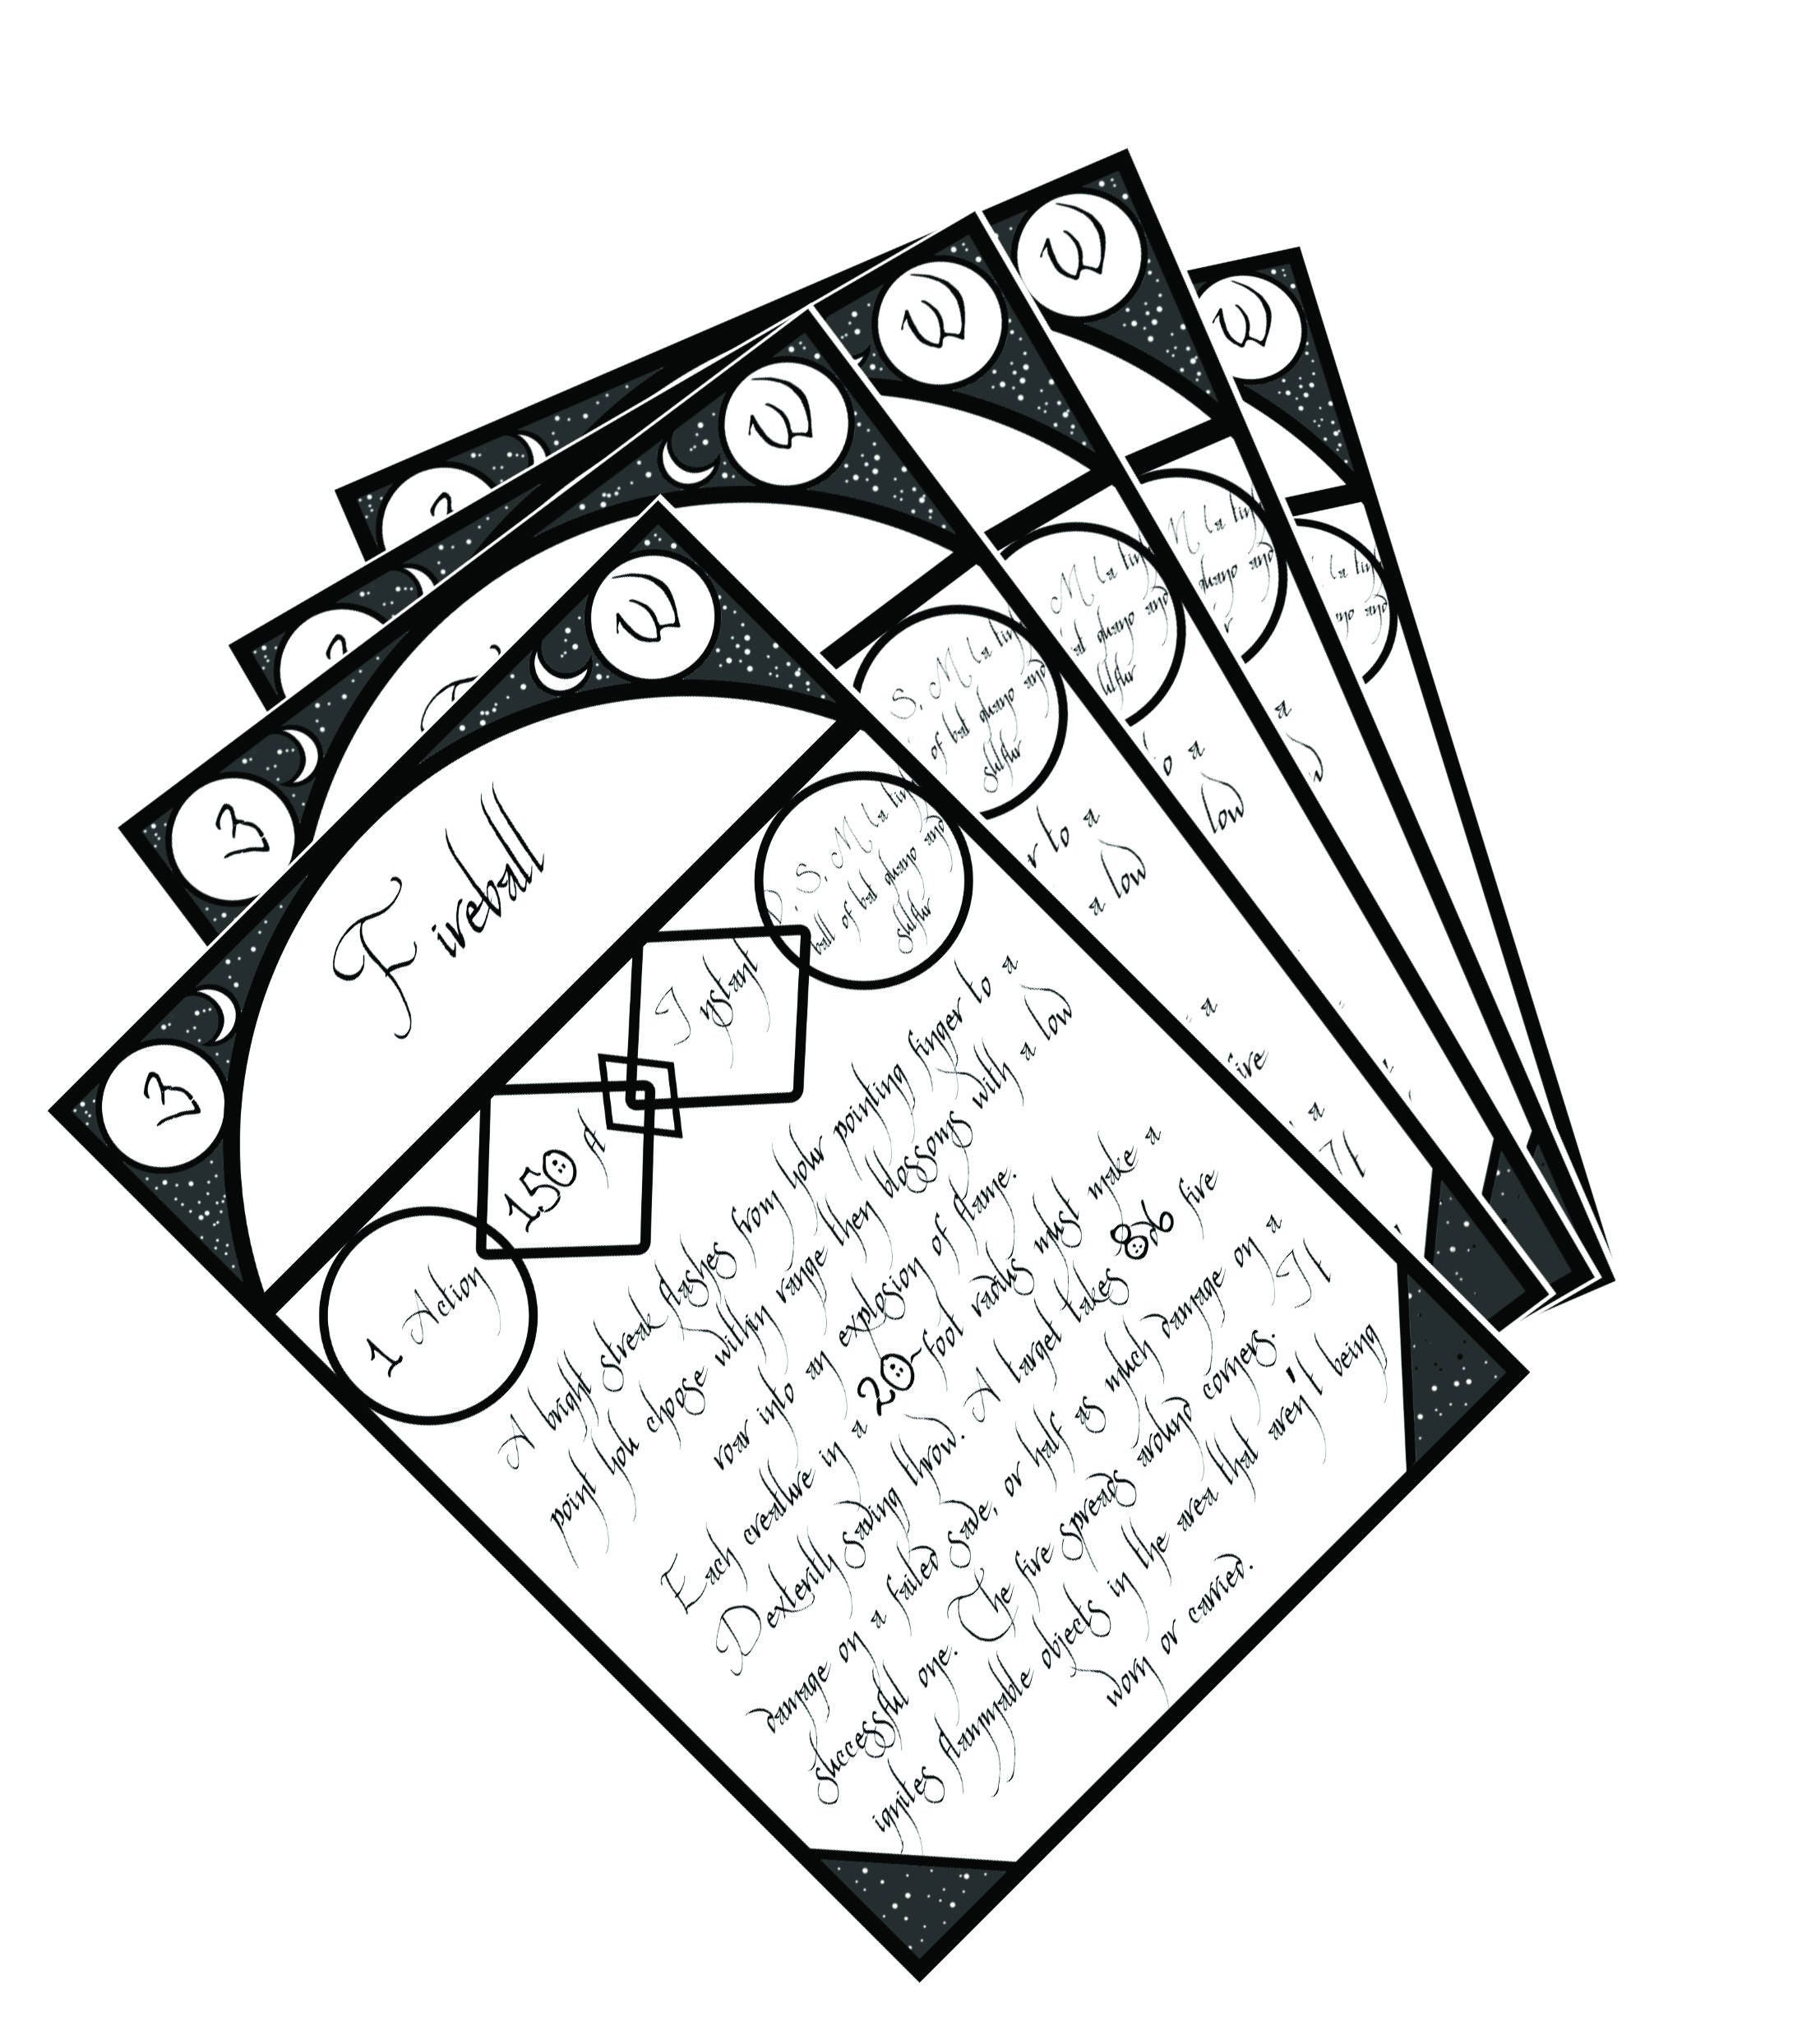 Printable Blank Spell Cards for Spell books in DnD/Pathfinder